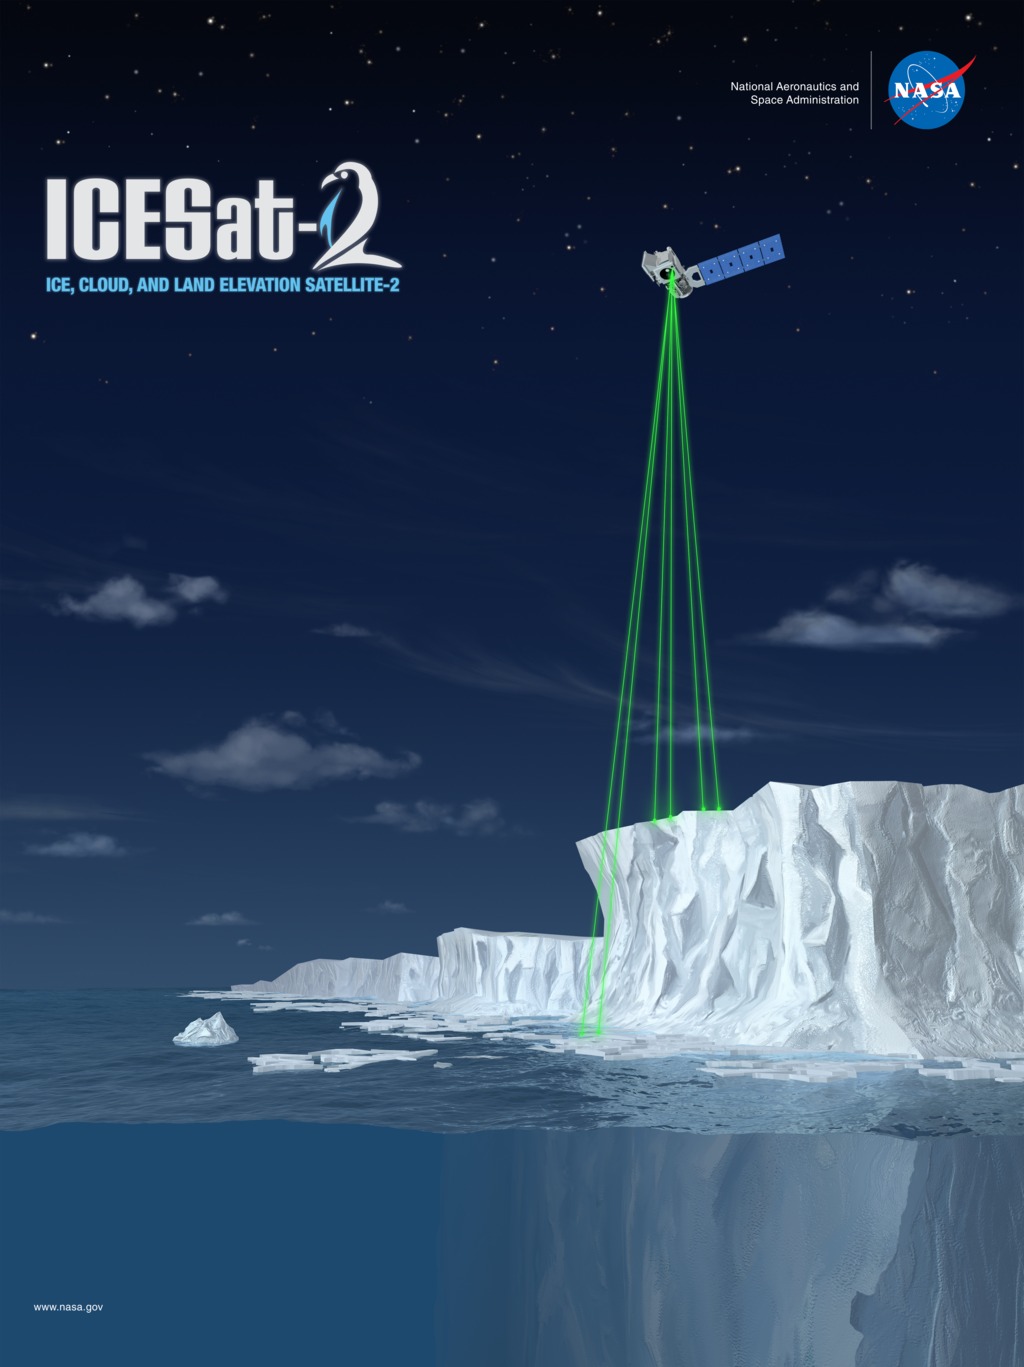 Very high resolution banner graphic of the ICESat-2 spacecraft, laser pairs and sea ice.